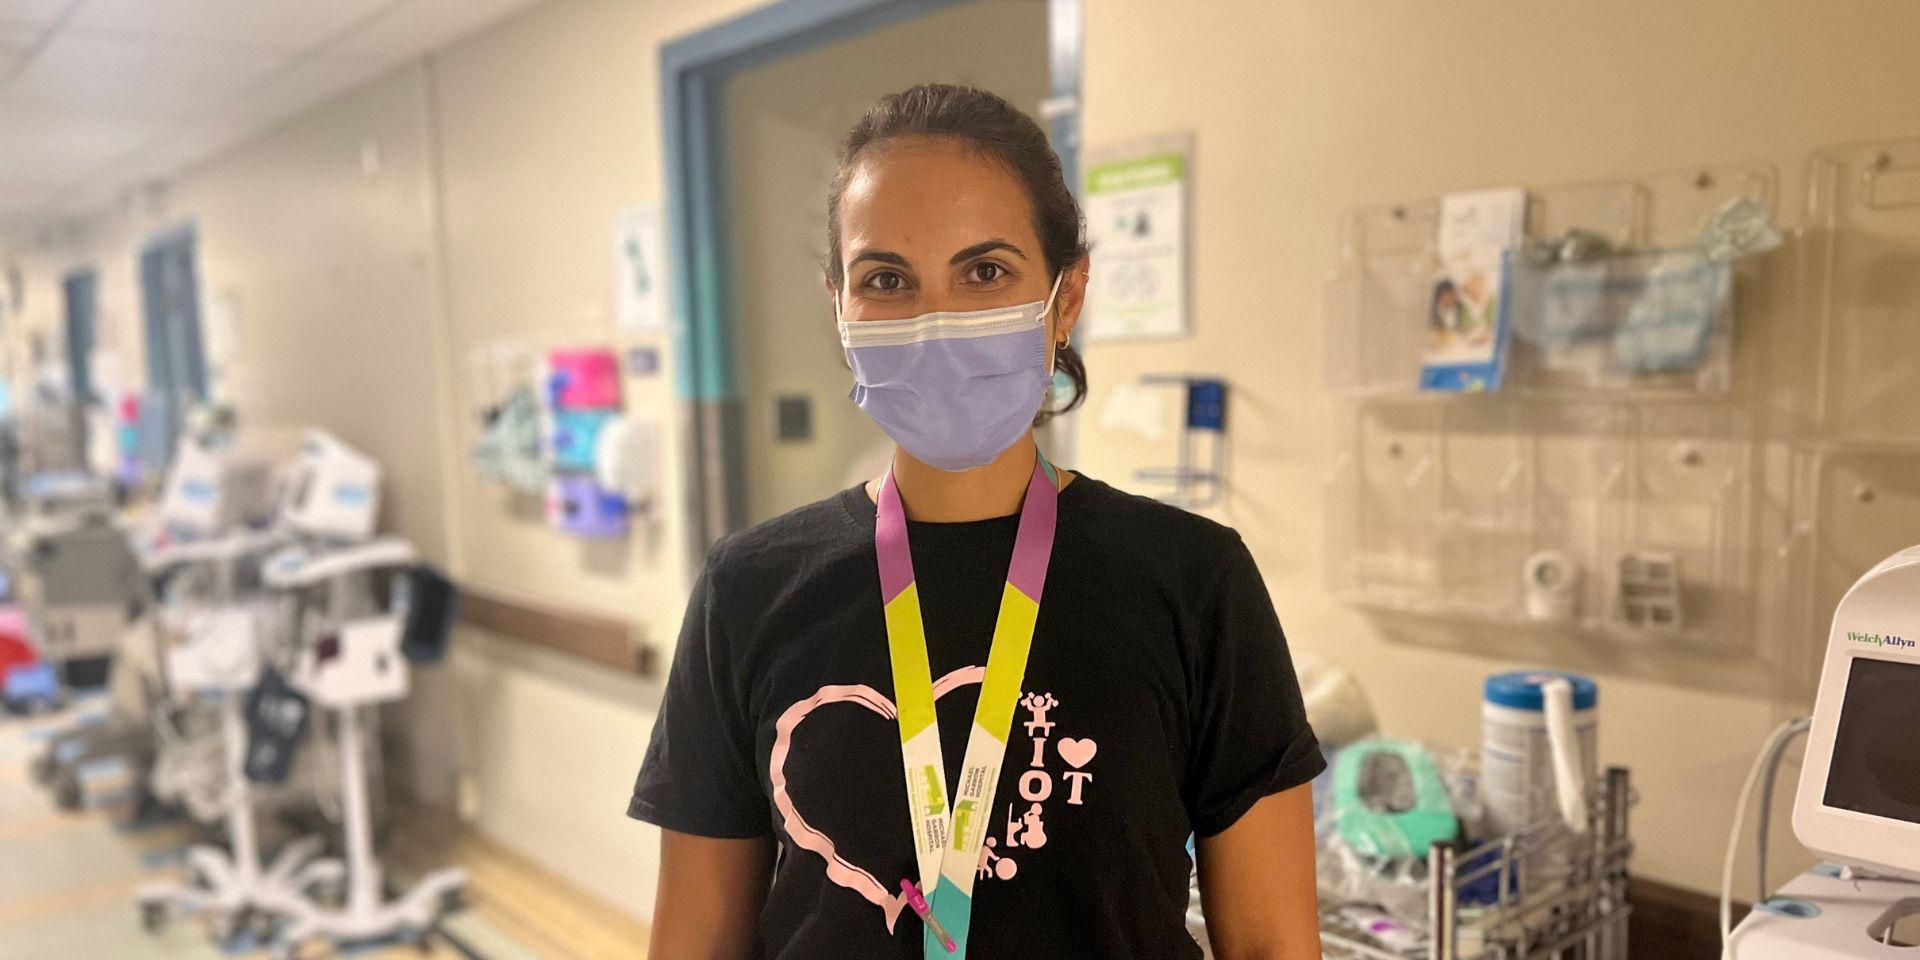 Occupational Therapist, Hanna Grover, standing in hallway with a mask on